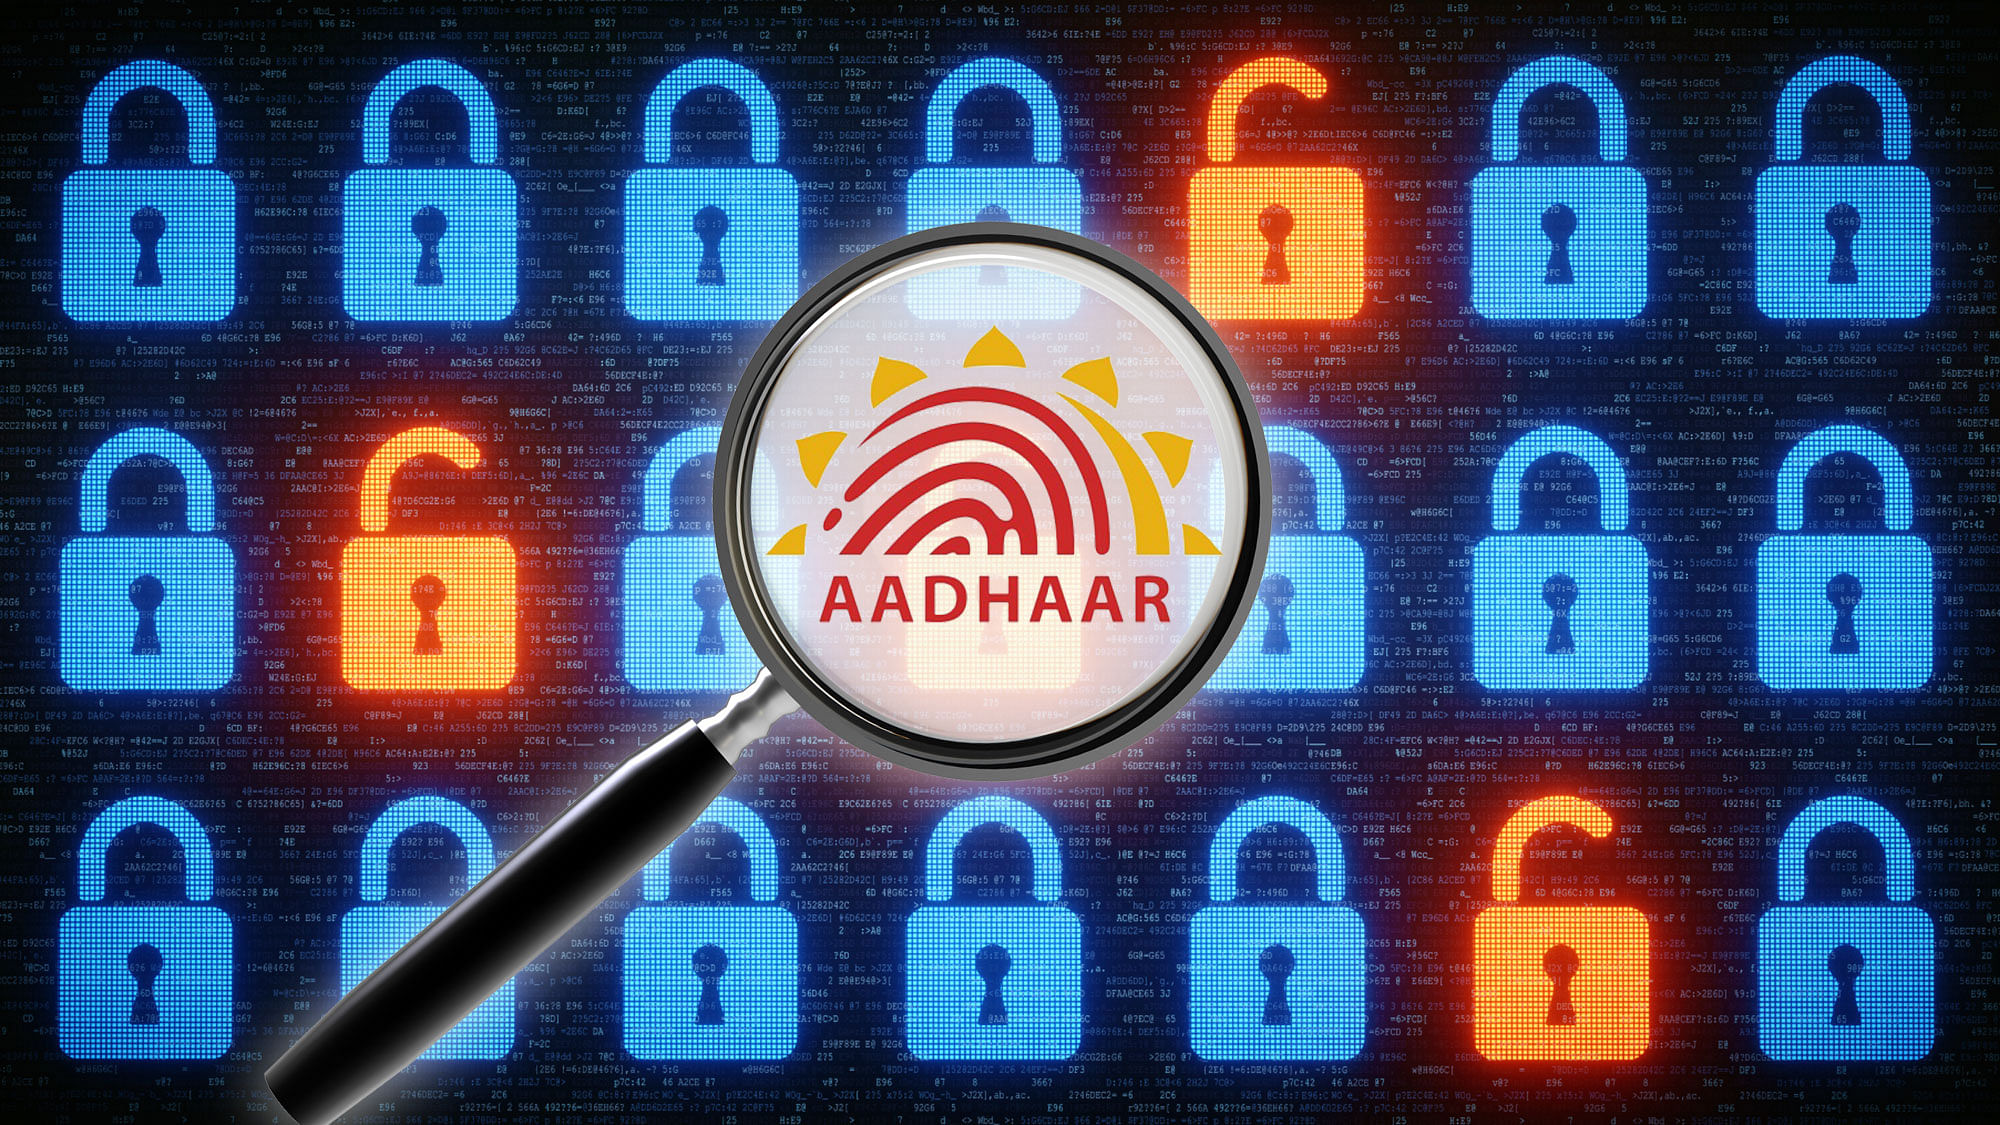 Qarth Technologies Pvt Ltd, a mobile-payment company allegedly accessed UIDAI‘s central information depository.